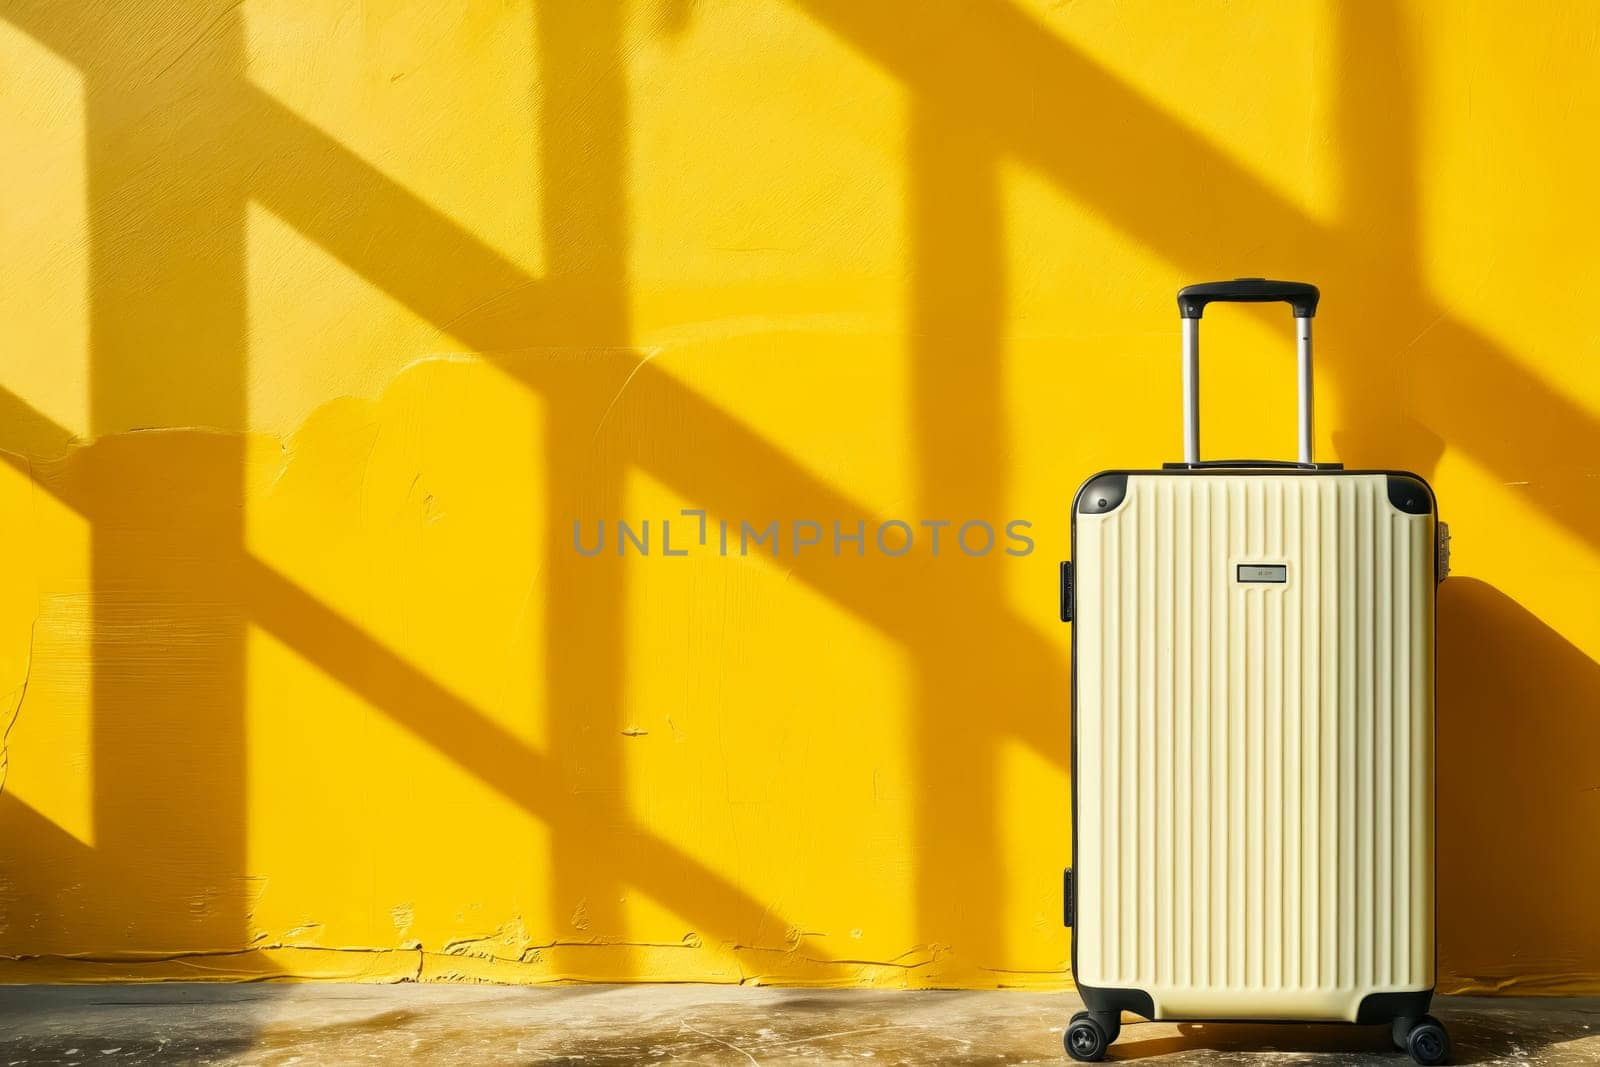 A tan suitcase is sitting on a yellow wall. The suitcase is open and the handle is visible. The scene is simple and uncluttered, with the suitcase being the main focus. Generative AI